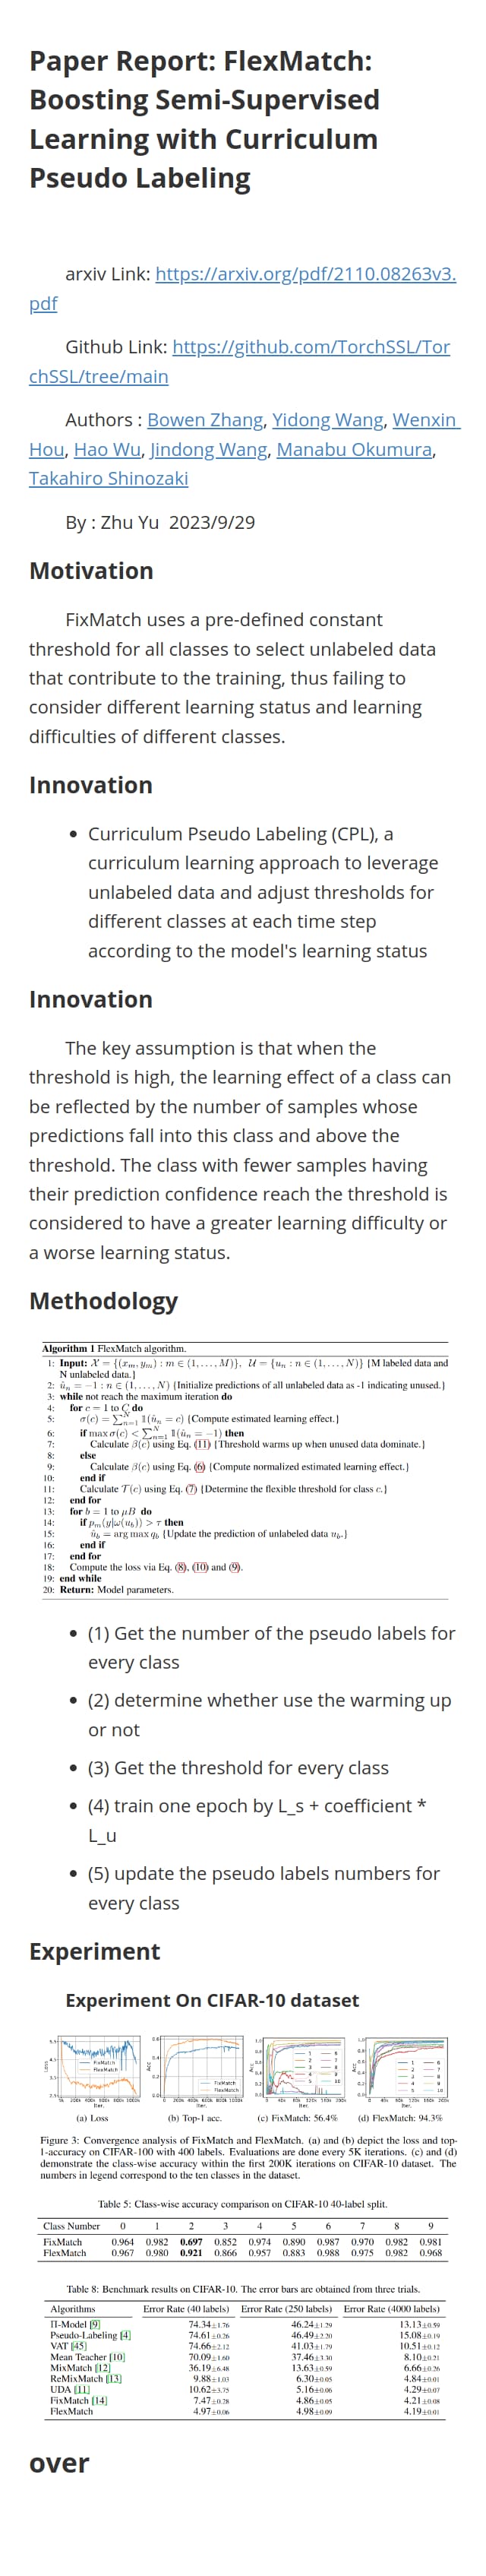 FlexMatch: Boosting Semi-Supervised Learning with Curriculum Pseudo Labeling